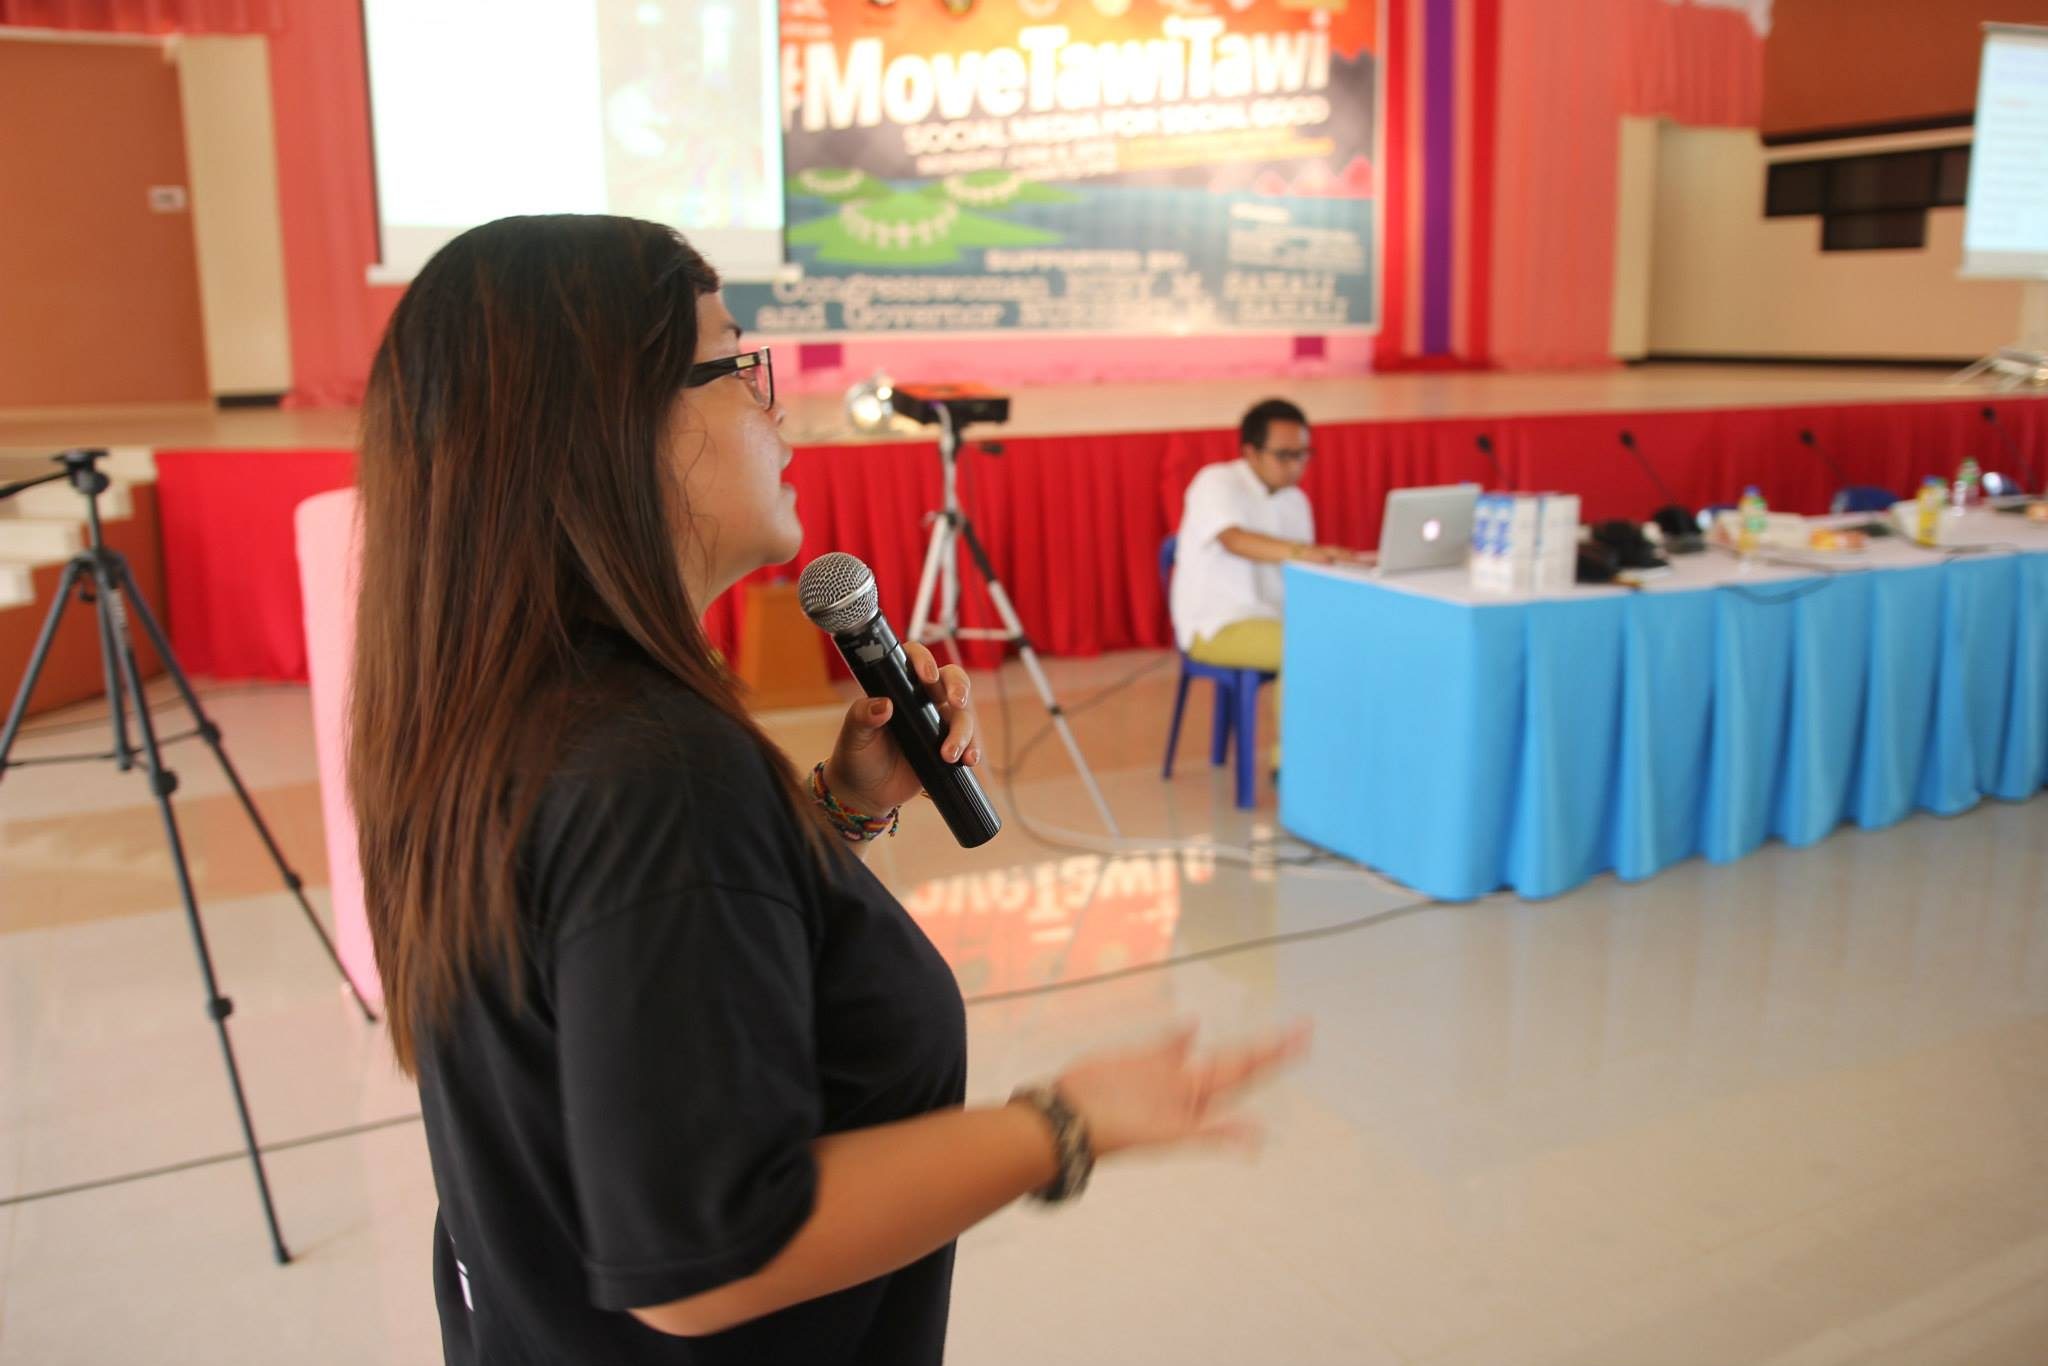 The author presents about Youth4Nature during the move workshop in Tawi Tawi in June 2015. File photo from Rappler 